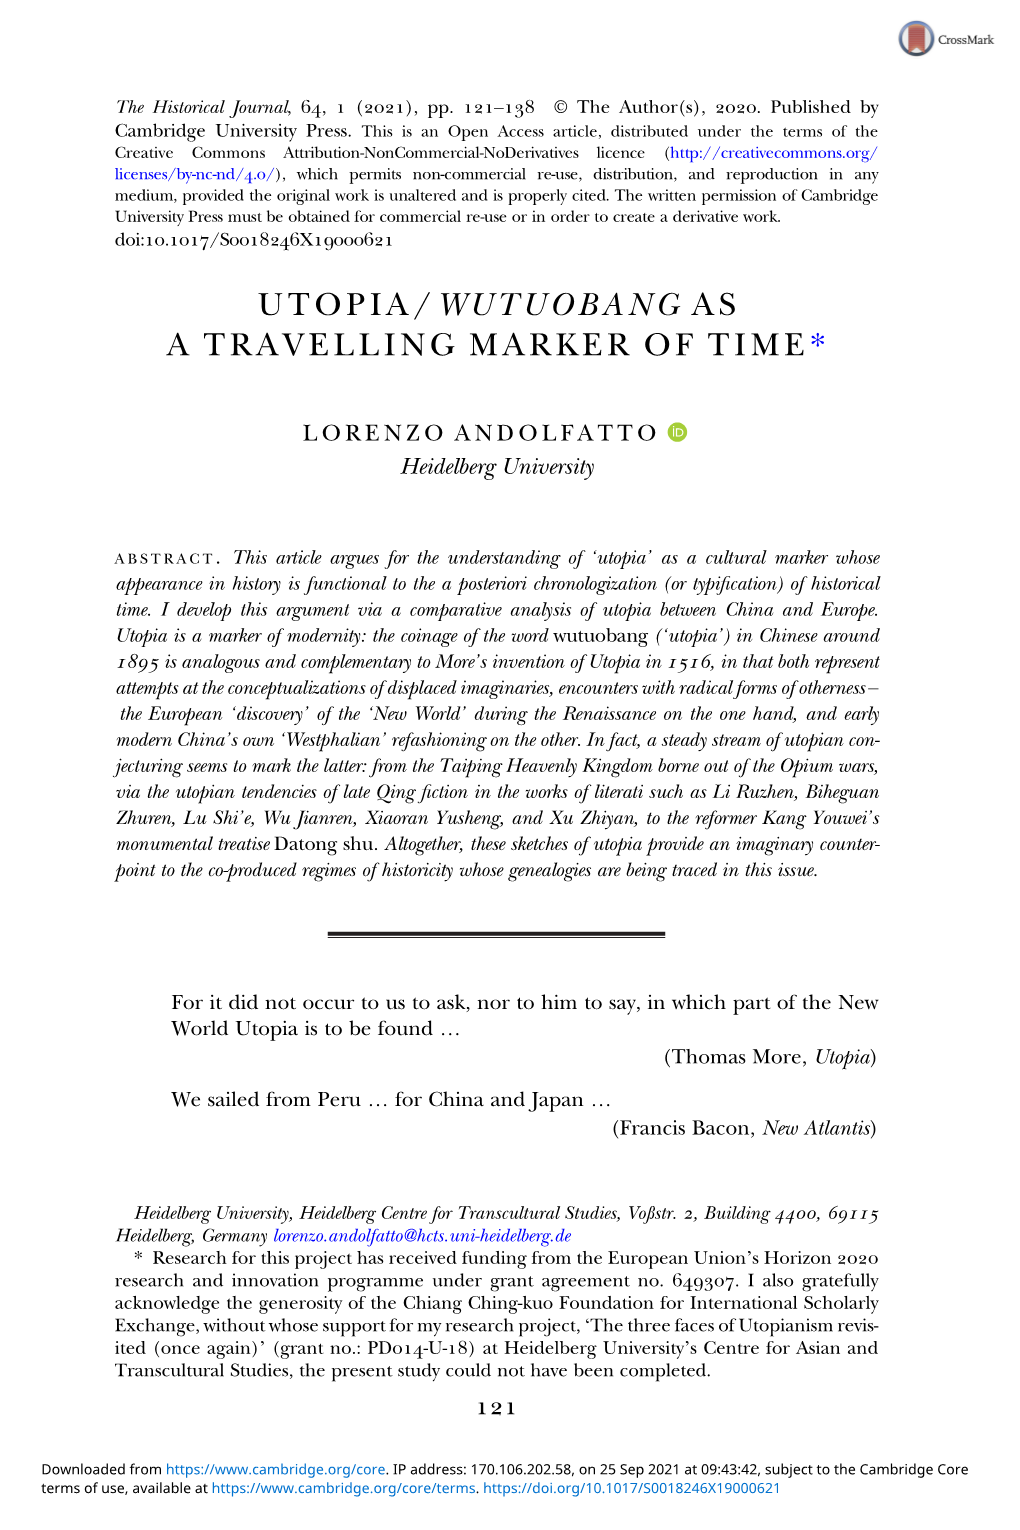 Utopia/Wutuobang As a Travelling Marker of Time*